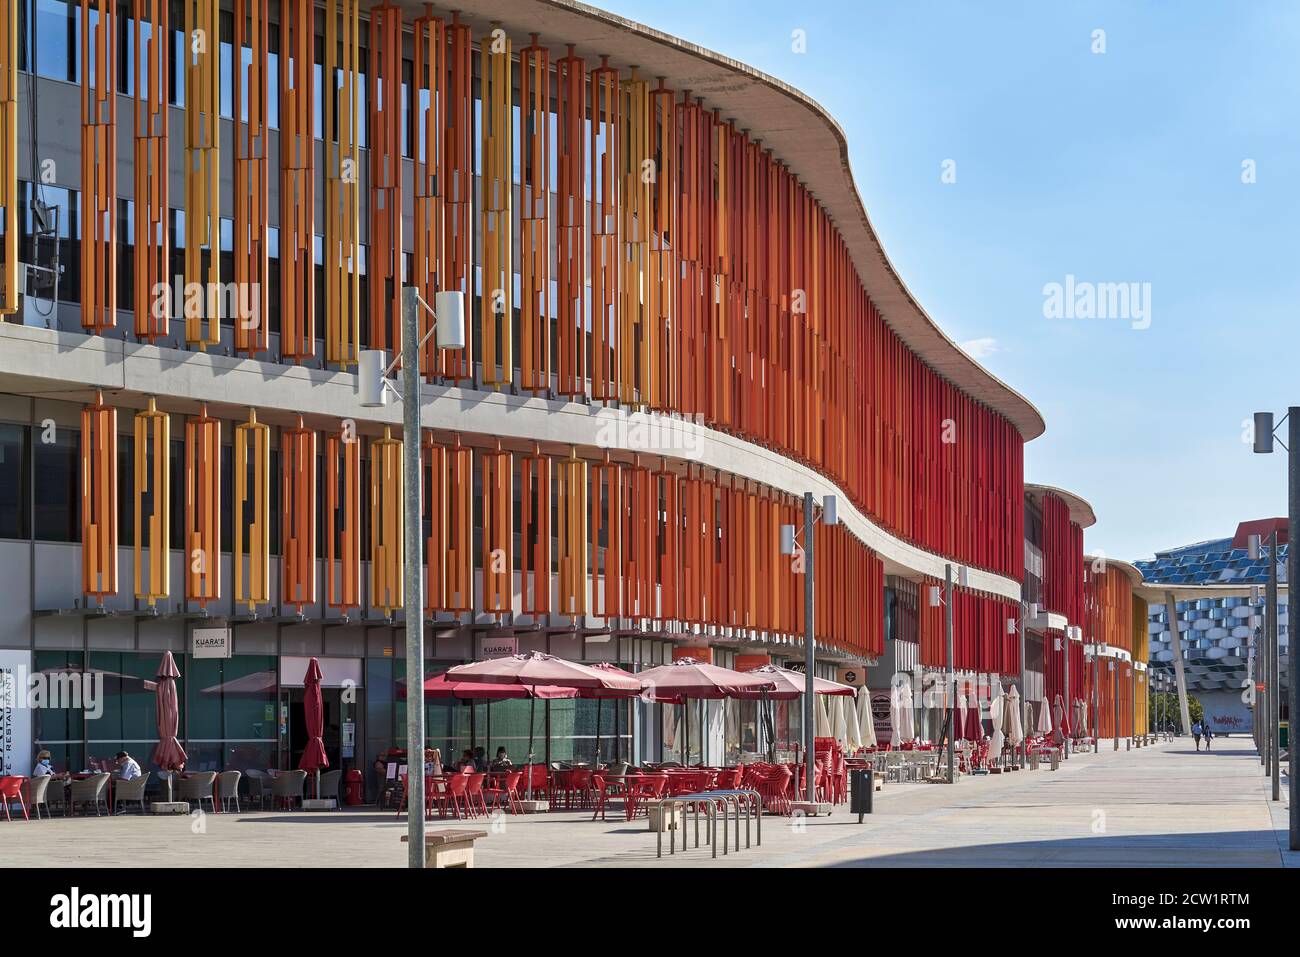 Buildings and terraces of bars, cafes and restaurants in the Specialized Exhibition of Zaragoza (Expo 2008), Aragon, Spain, Europe Stock Photo